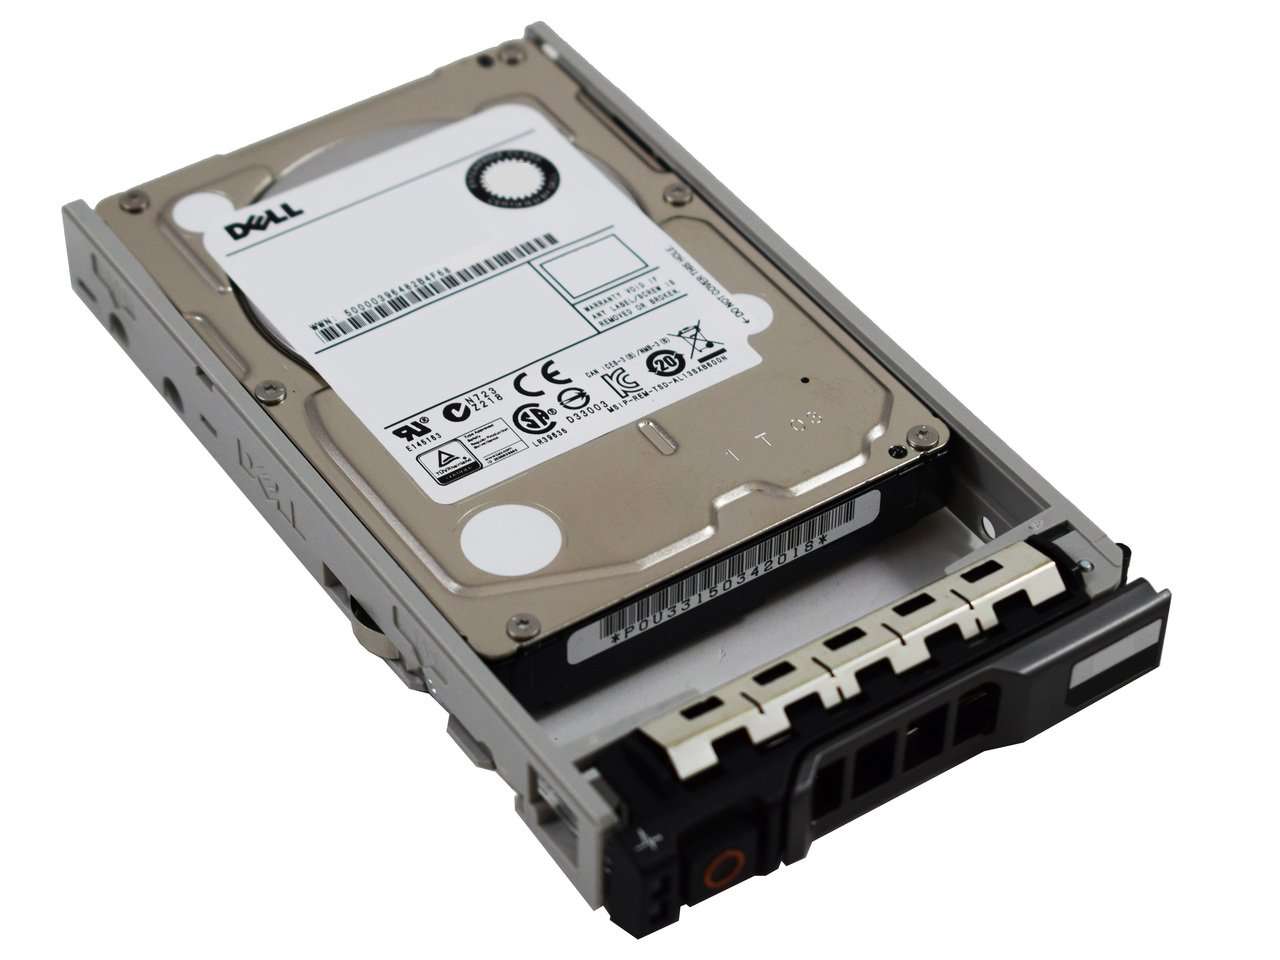 Dell G13 440-ADPC 600GB 15K RPM SAS 6Gb/s 512n 2.5" Manufacturer Recertified HDD